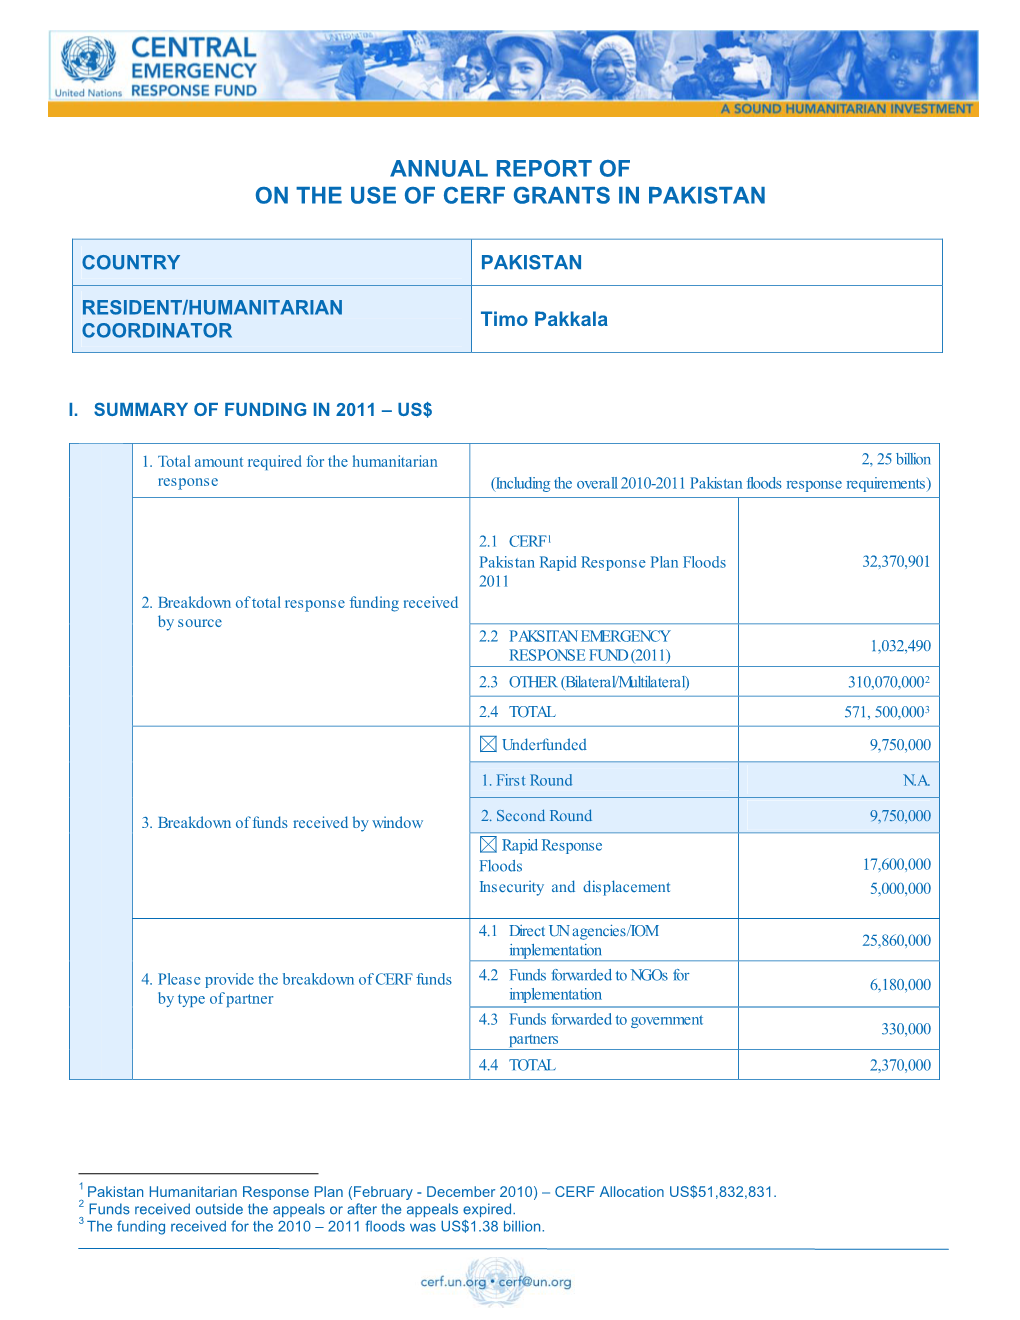 Annual Report of on the Use of Cerf Grants in Pakistan